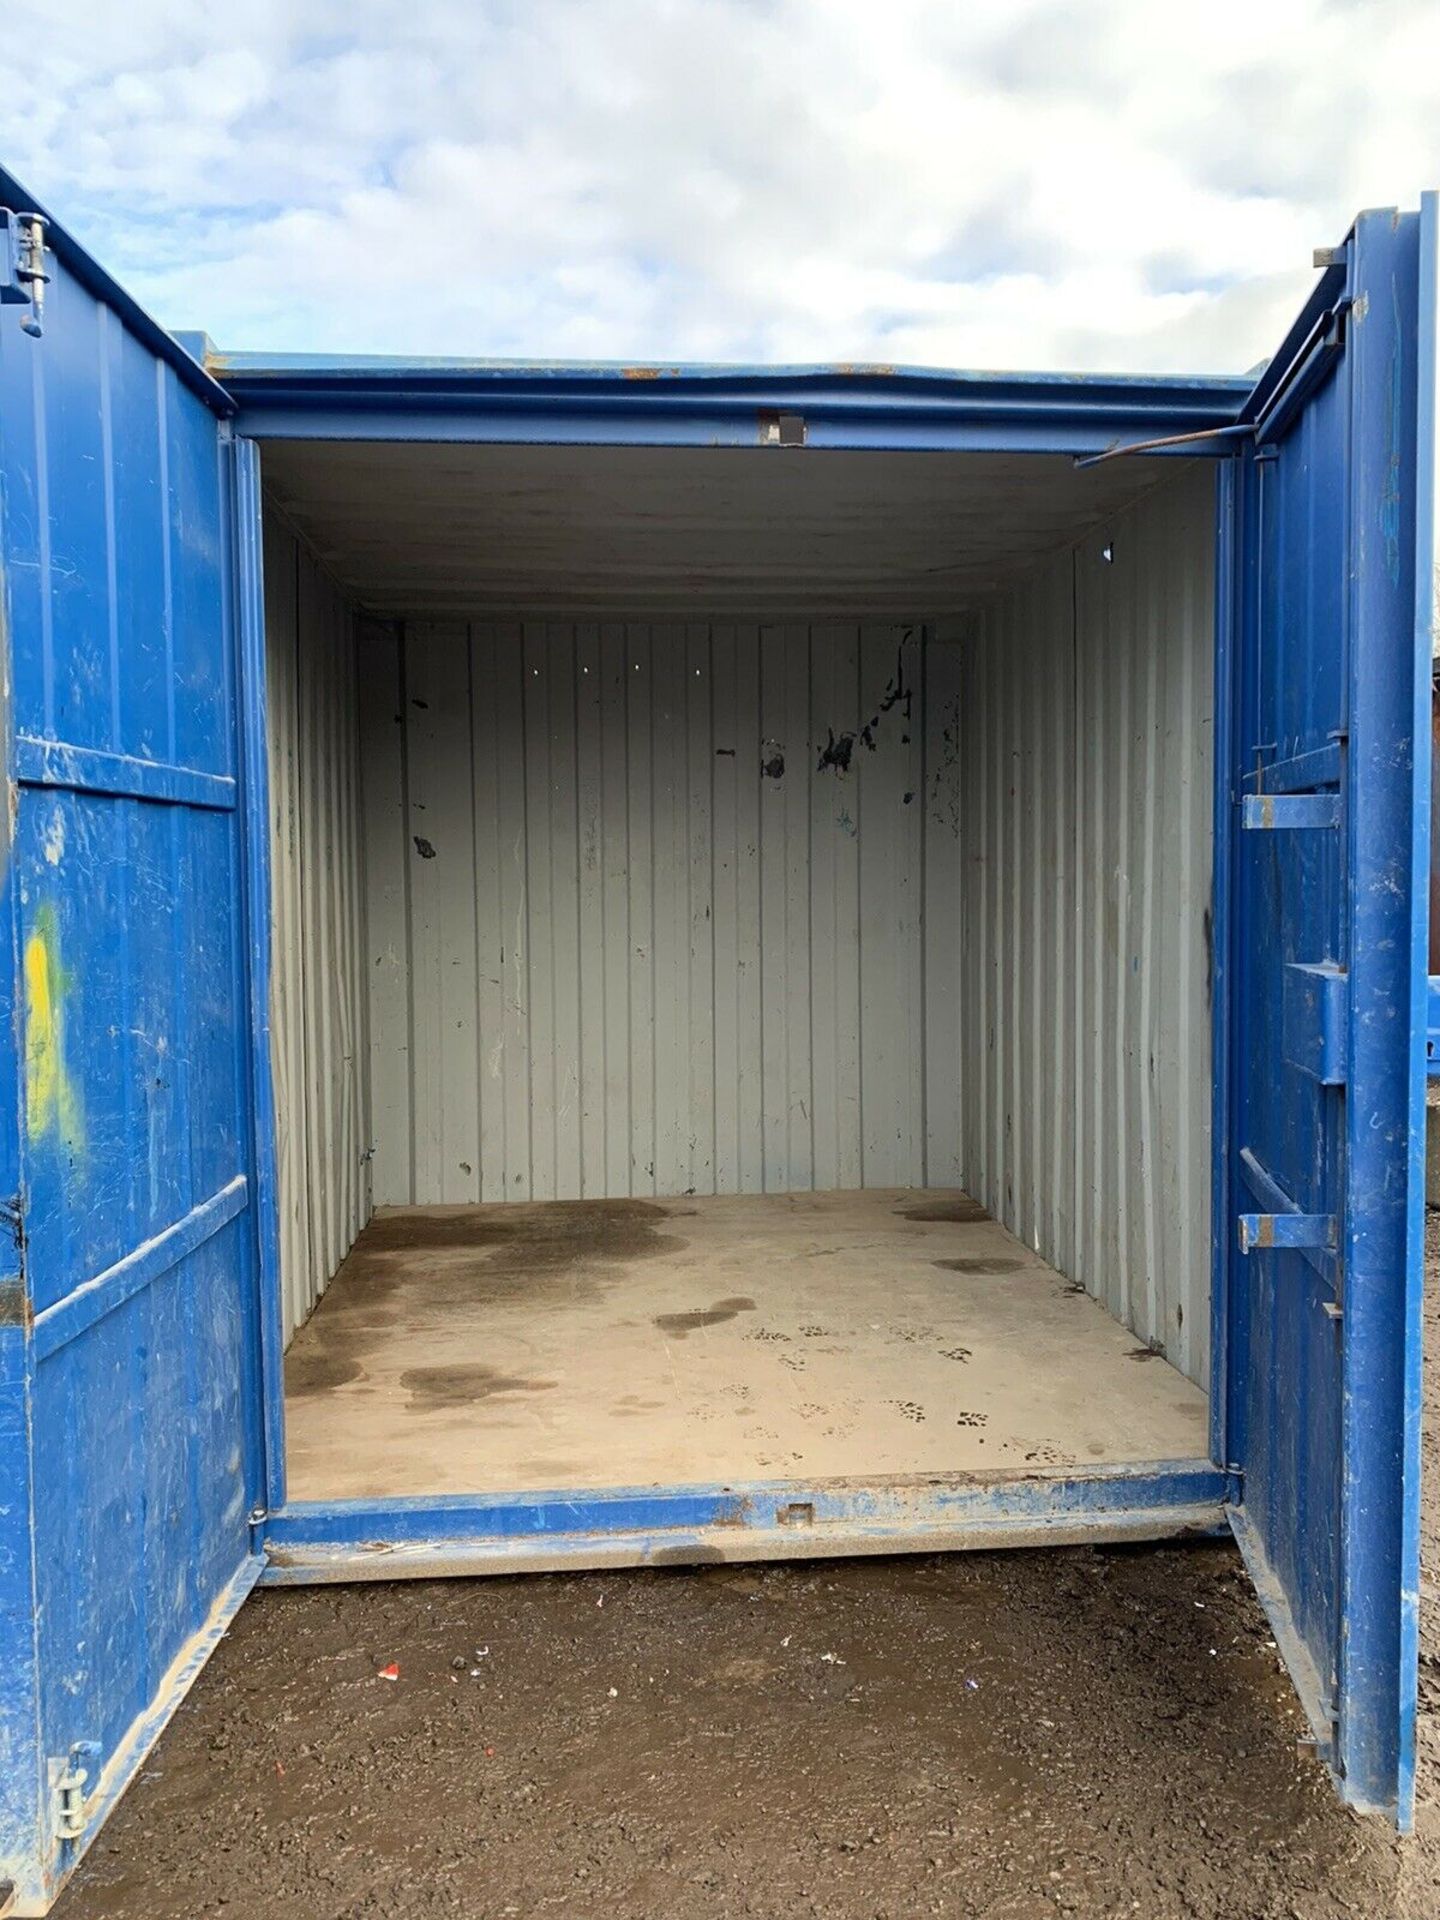 10ft Anti Vandal Steel Portable Storage Container - Image 4 of 6